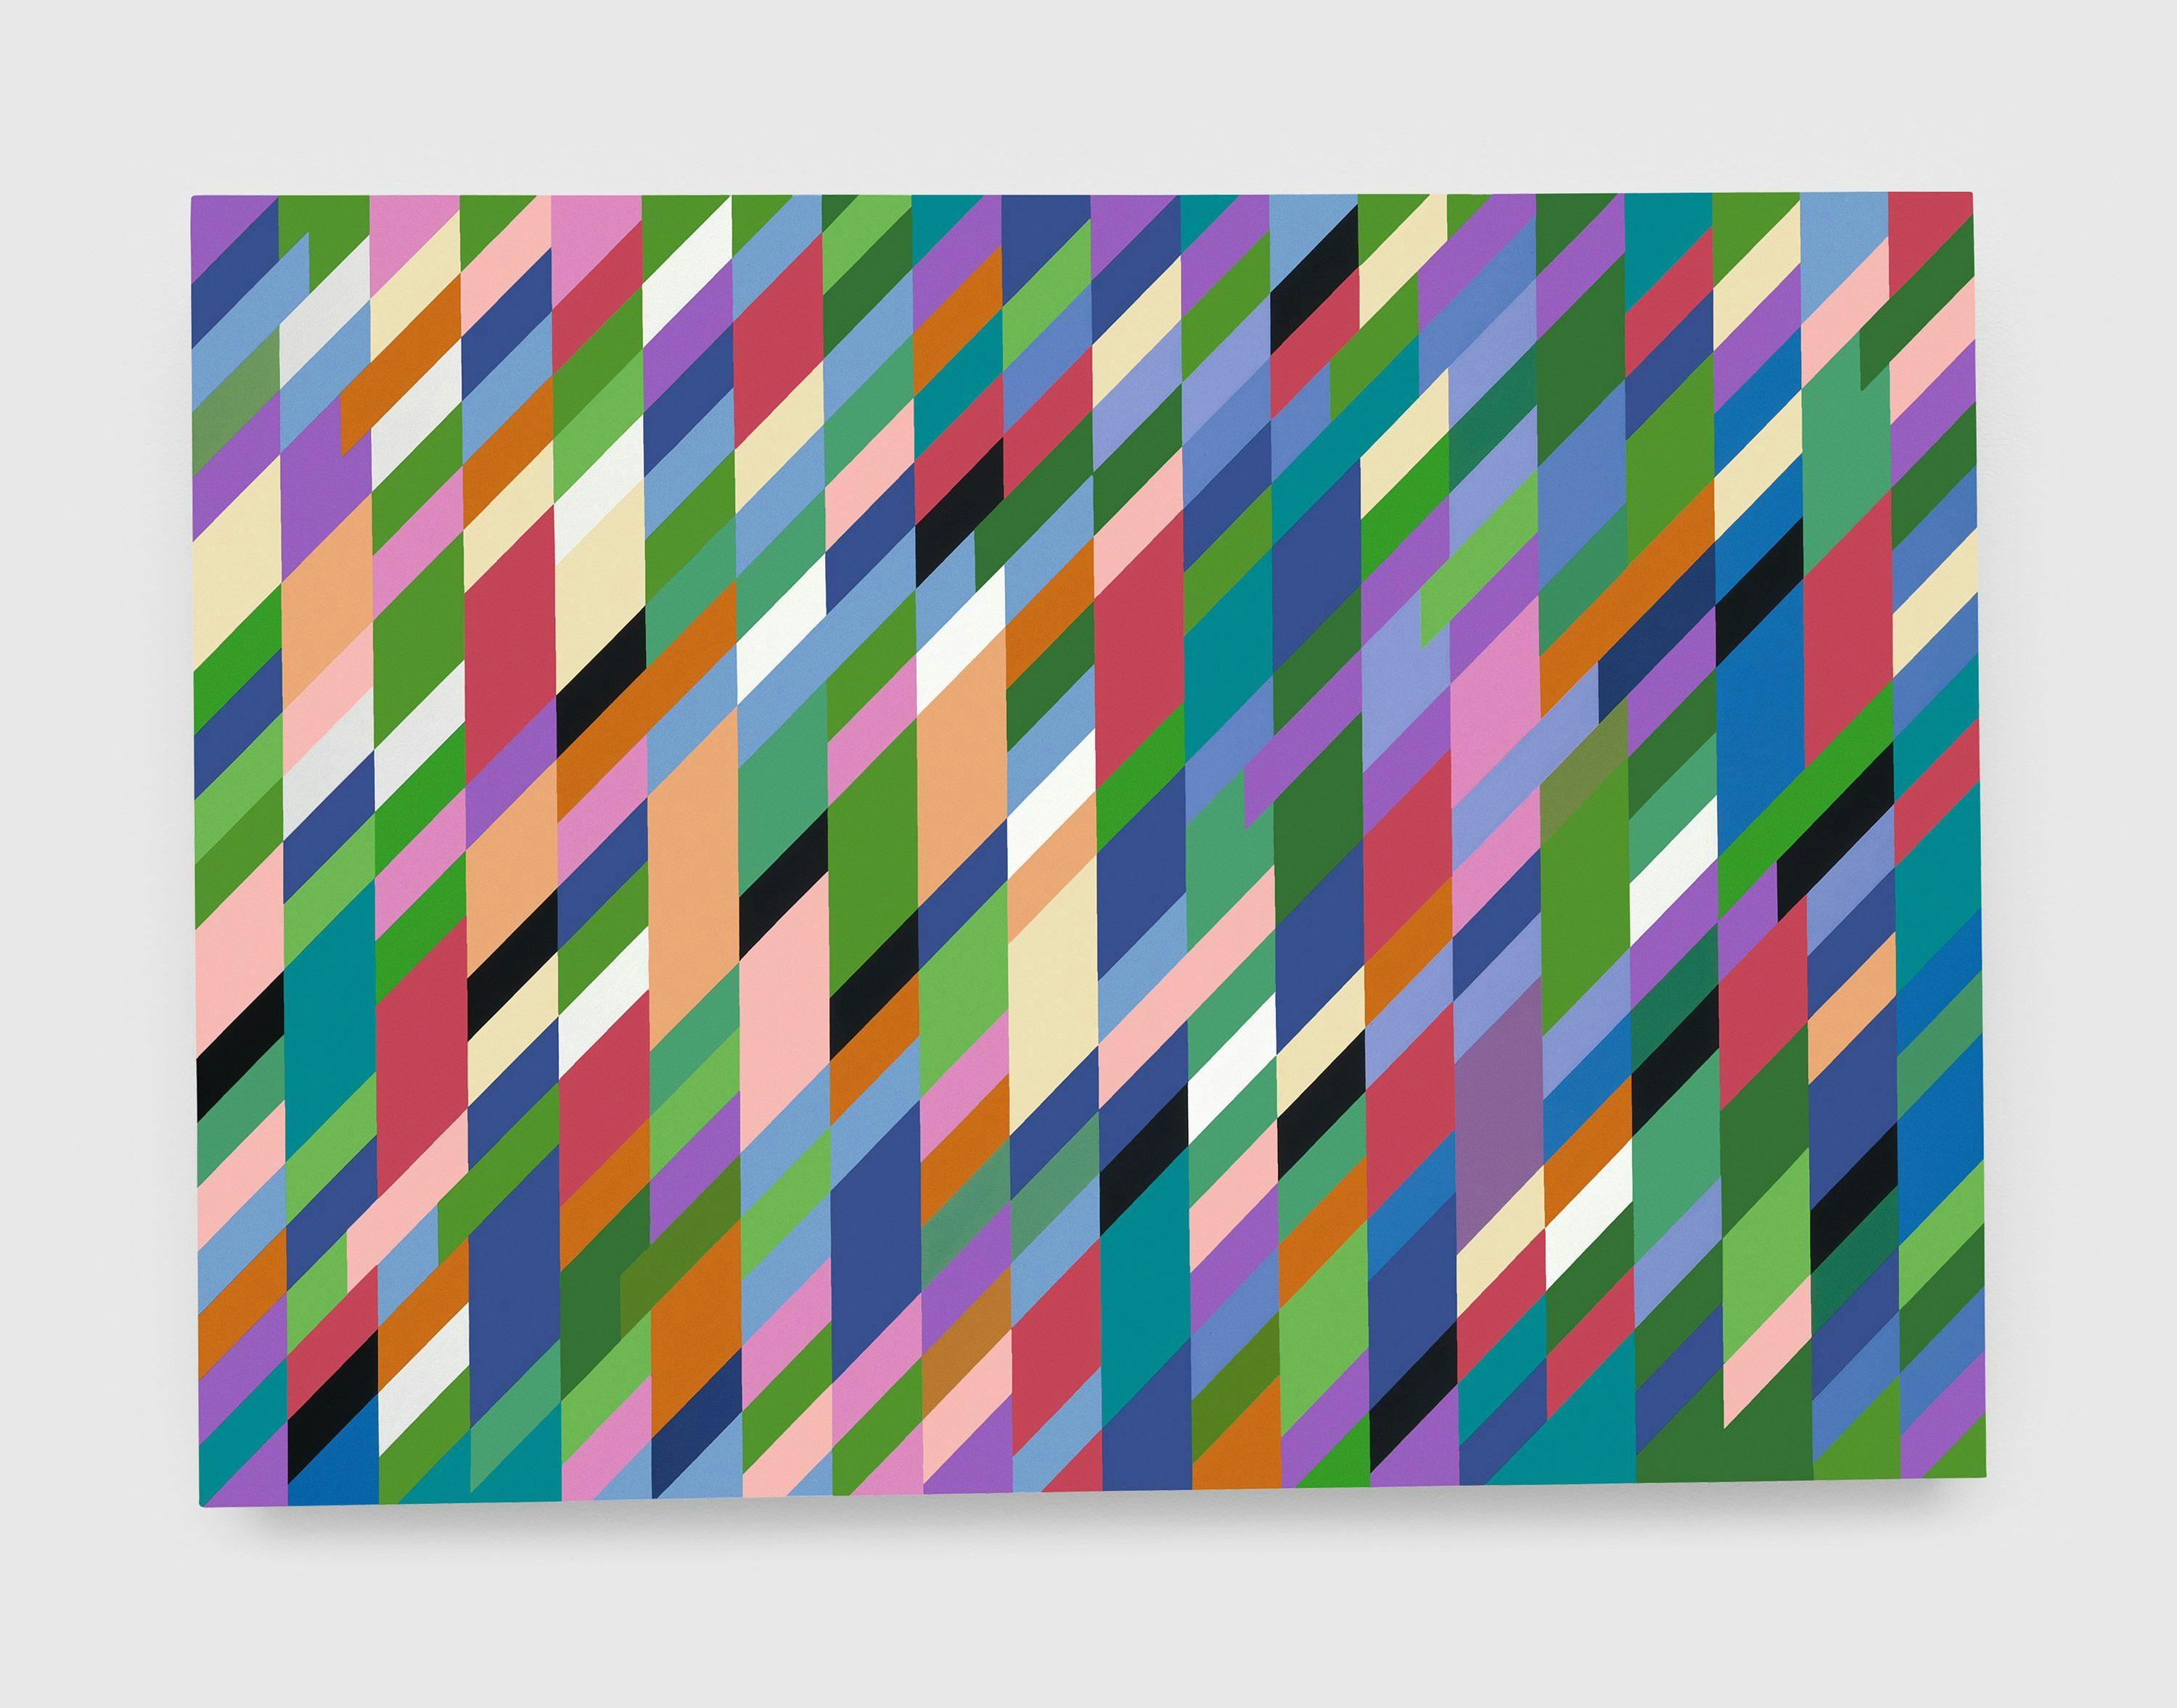 A painting by Bridget Riley, titled High Sky, dated 1991.